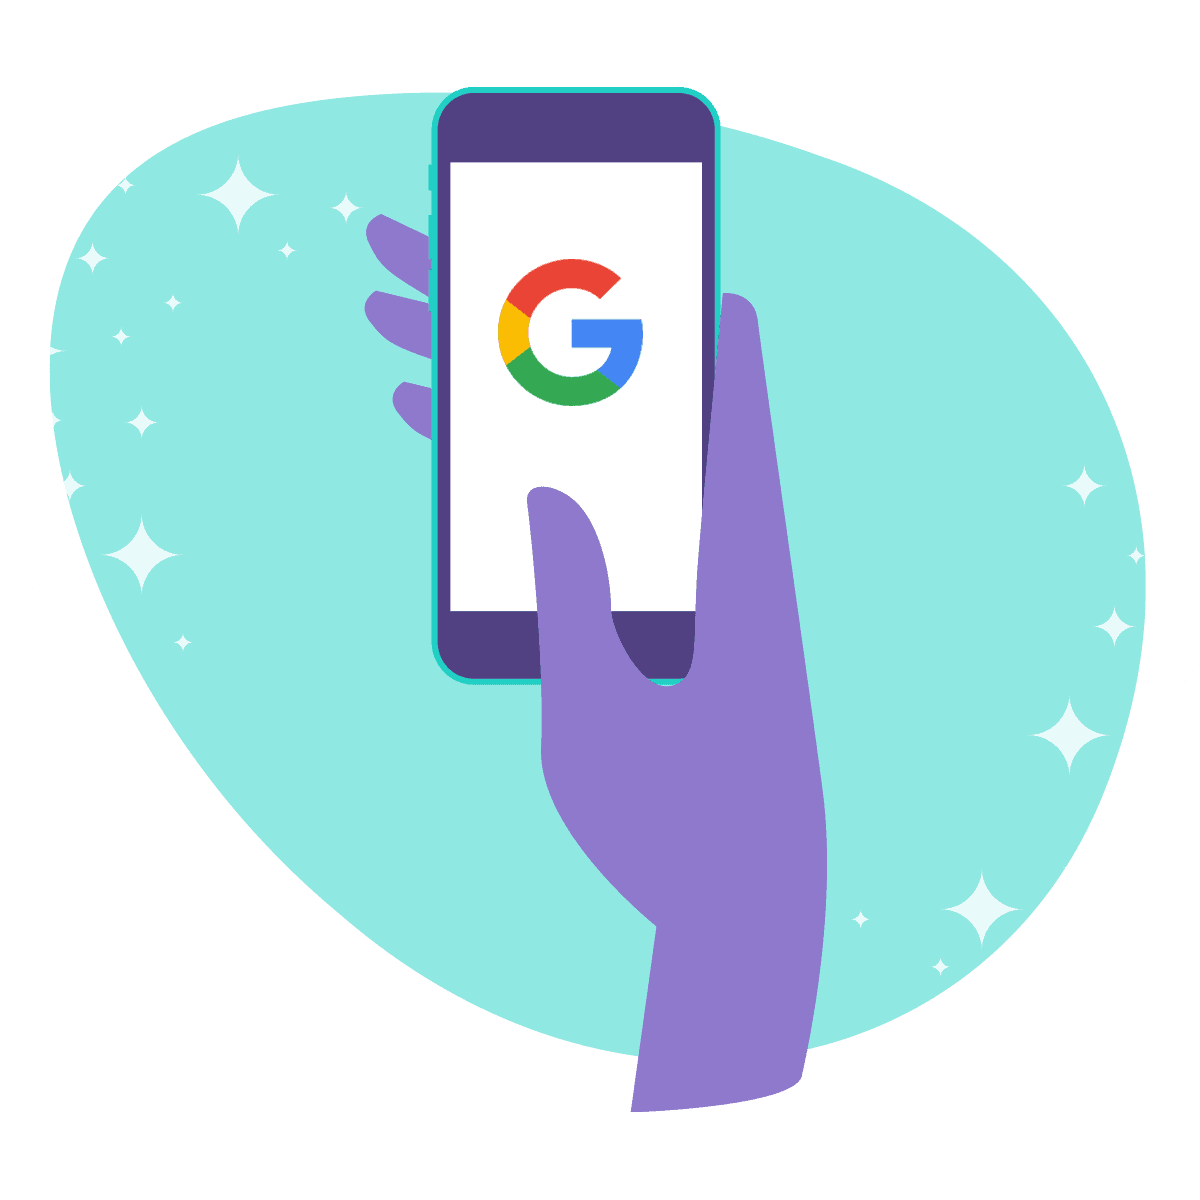 Google stories on a phone